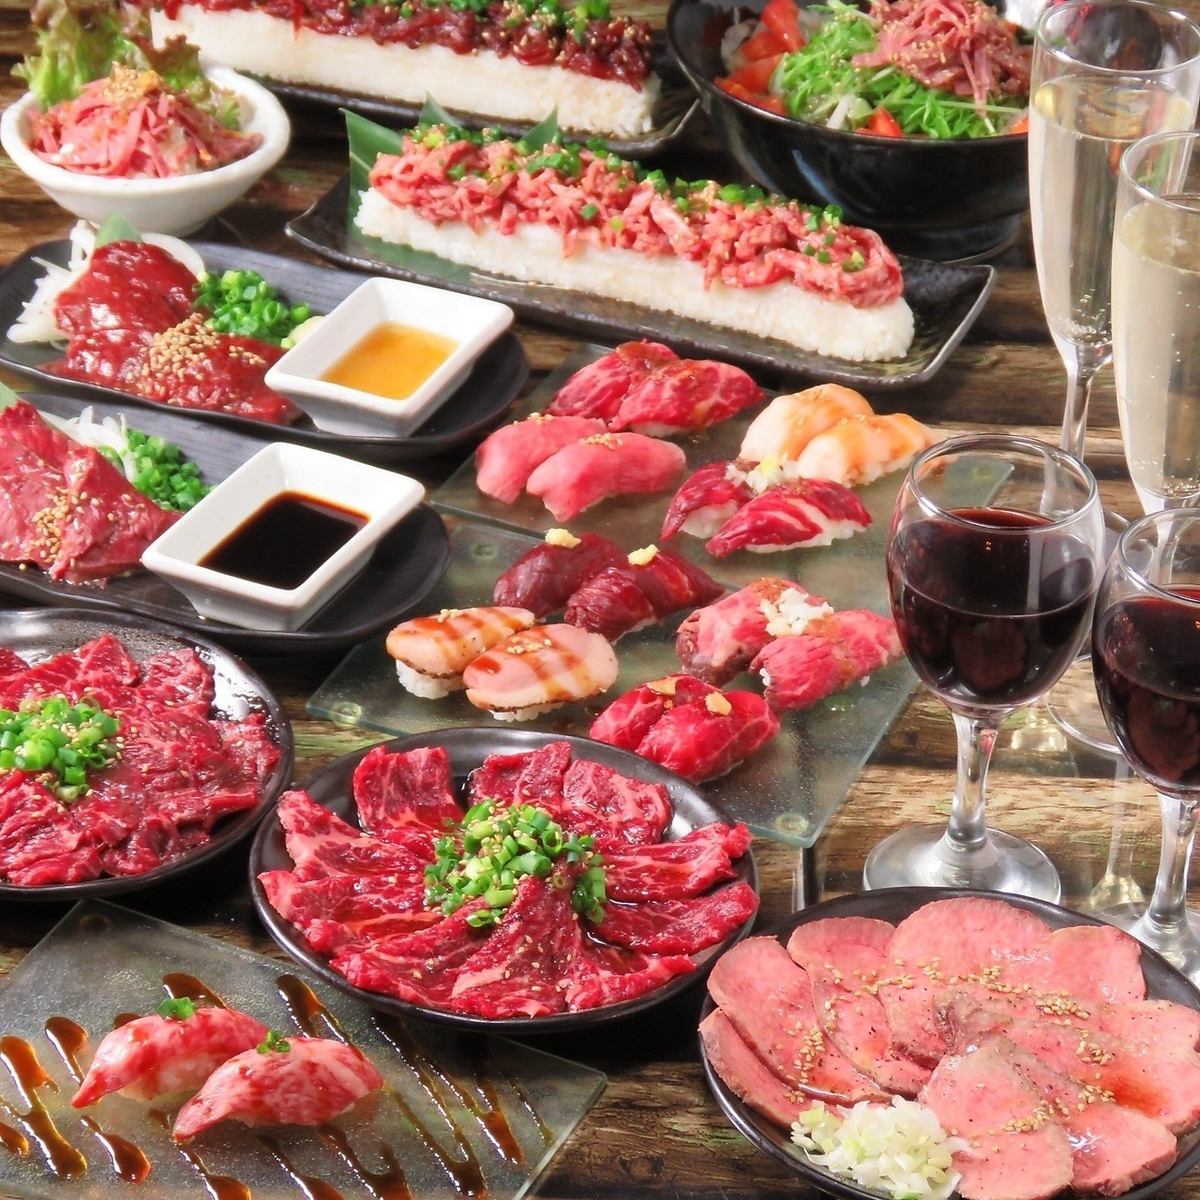 ☆All-you-can-eat and drink meat sushi and yakiniku starting from 2,000 yen☆We also have all-you-can-drink single items for even more value☆